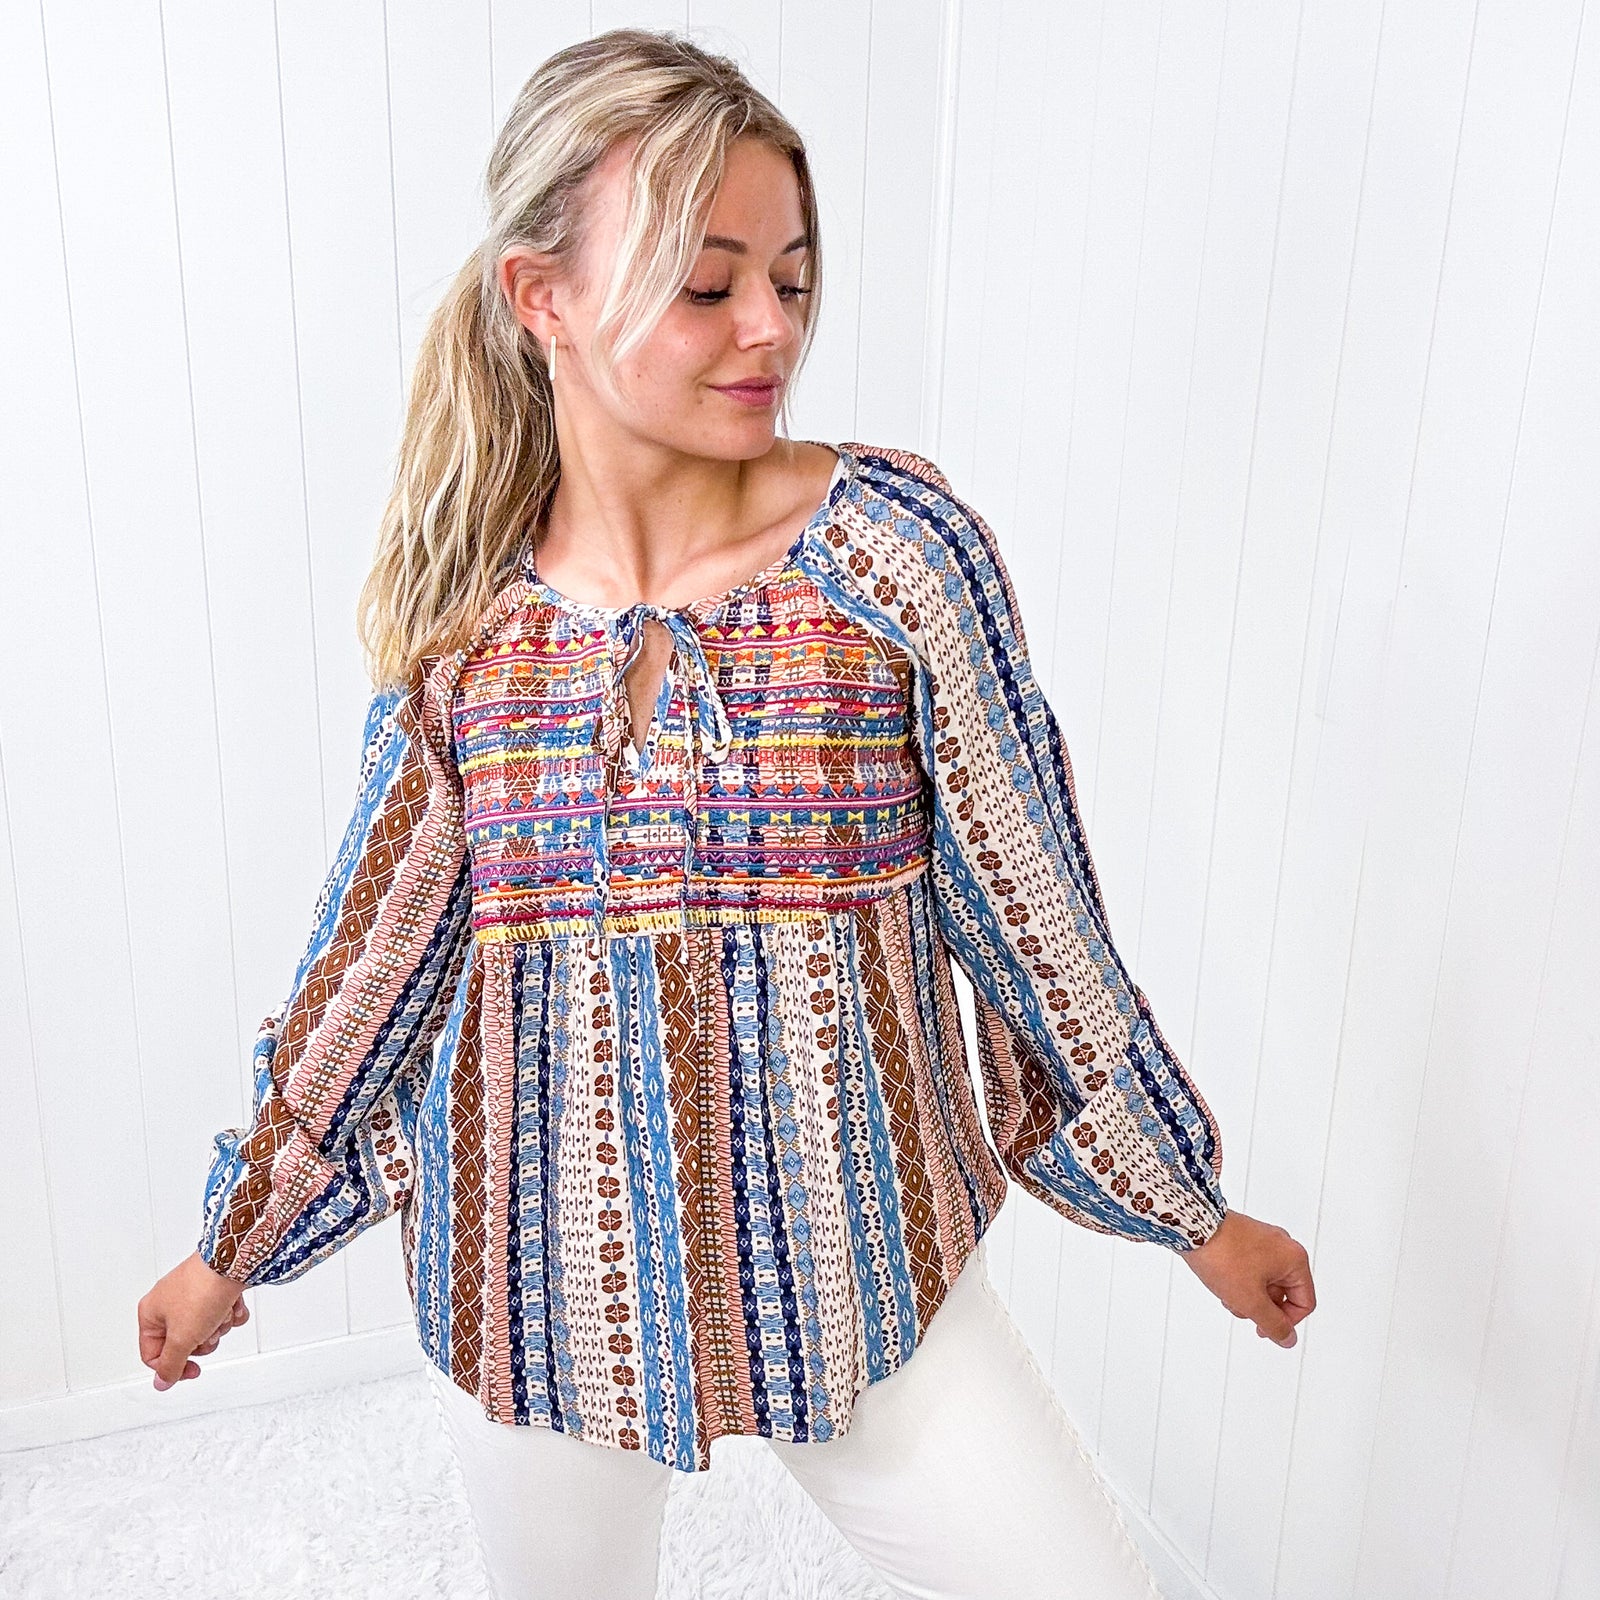 Savanna Jane Open Sky Boho Tunic with Embroidery in Navy Mauve - Boujee Boutique 